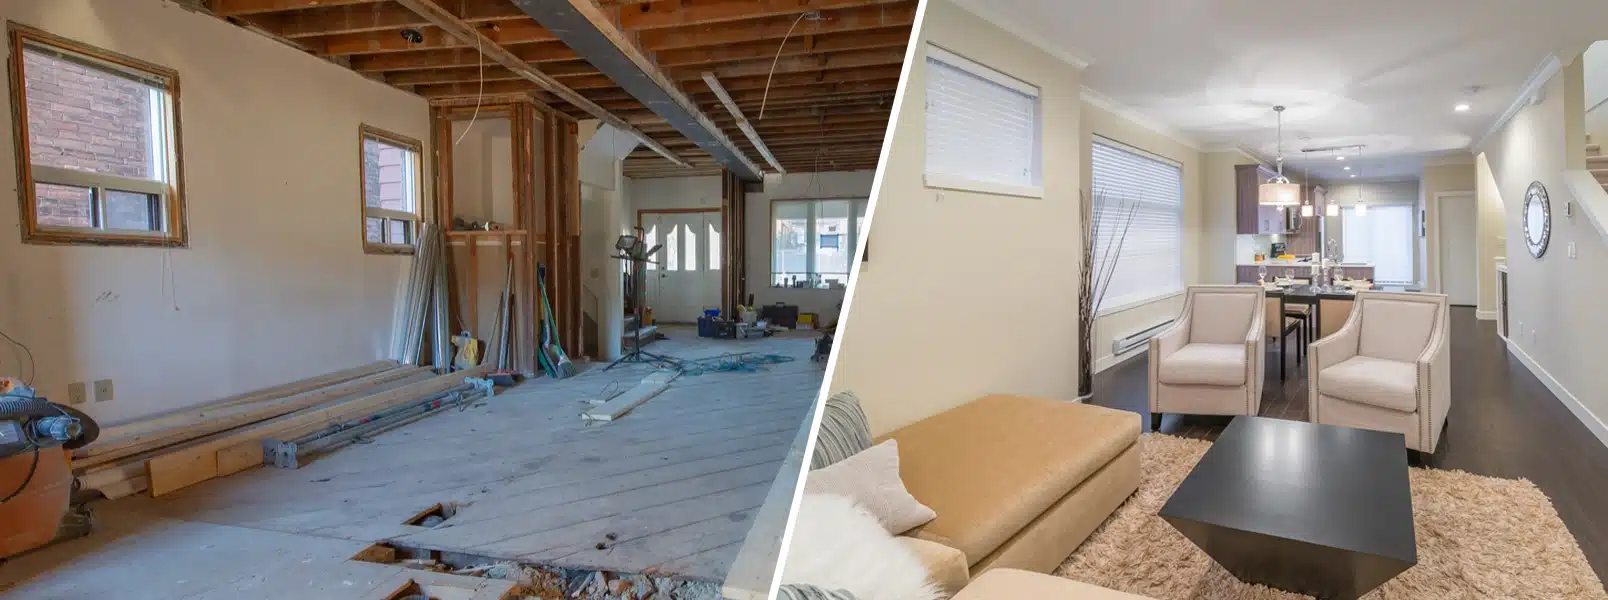 townhouse under renovation before and after-1